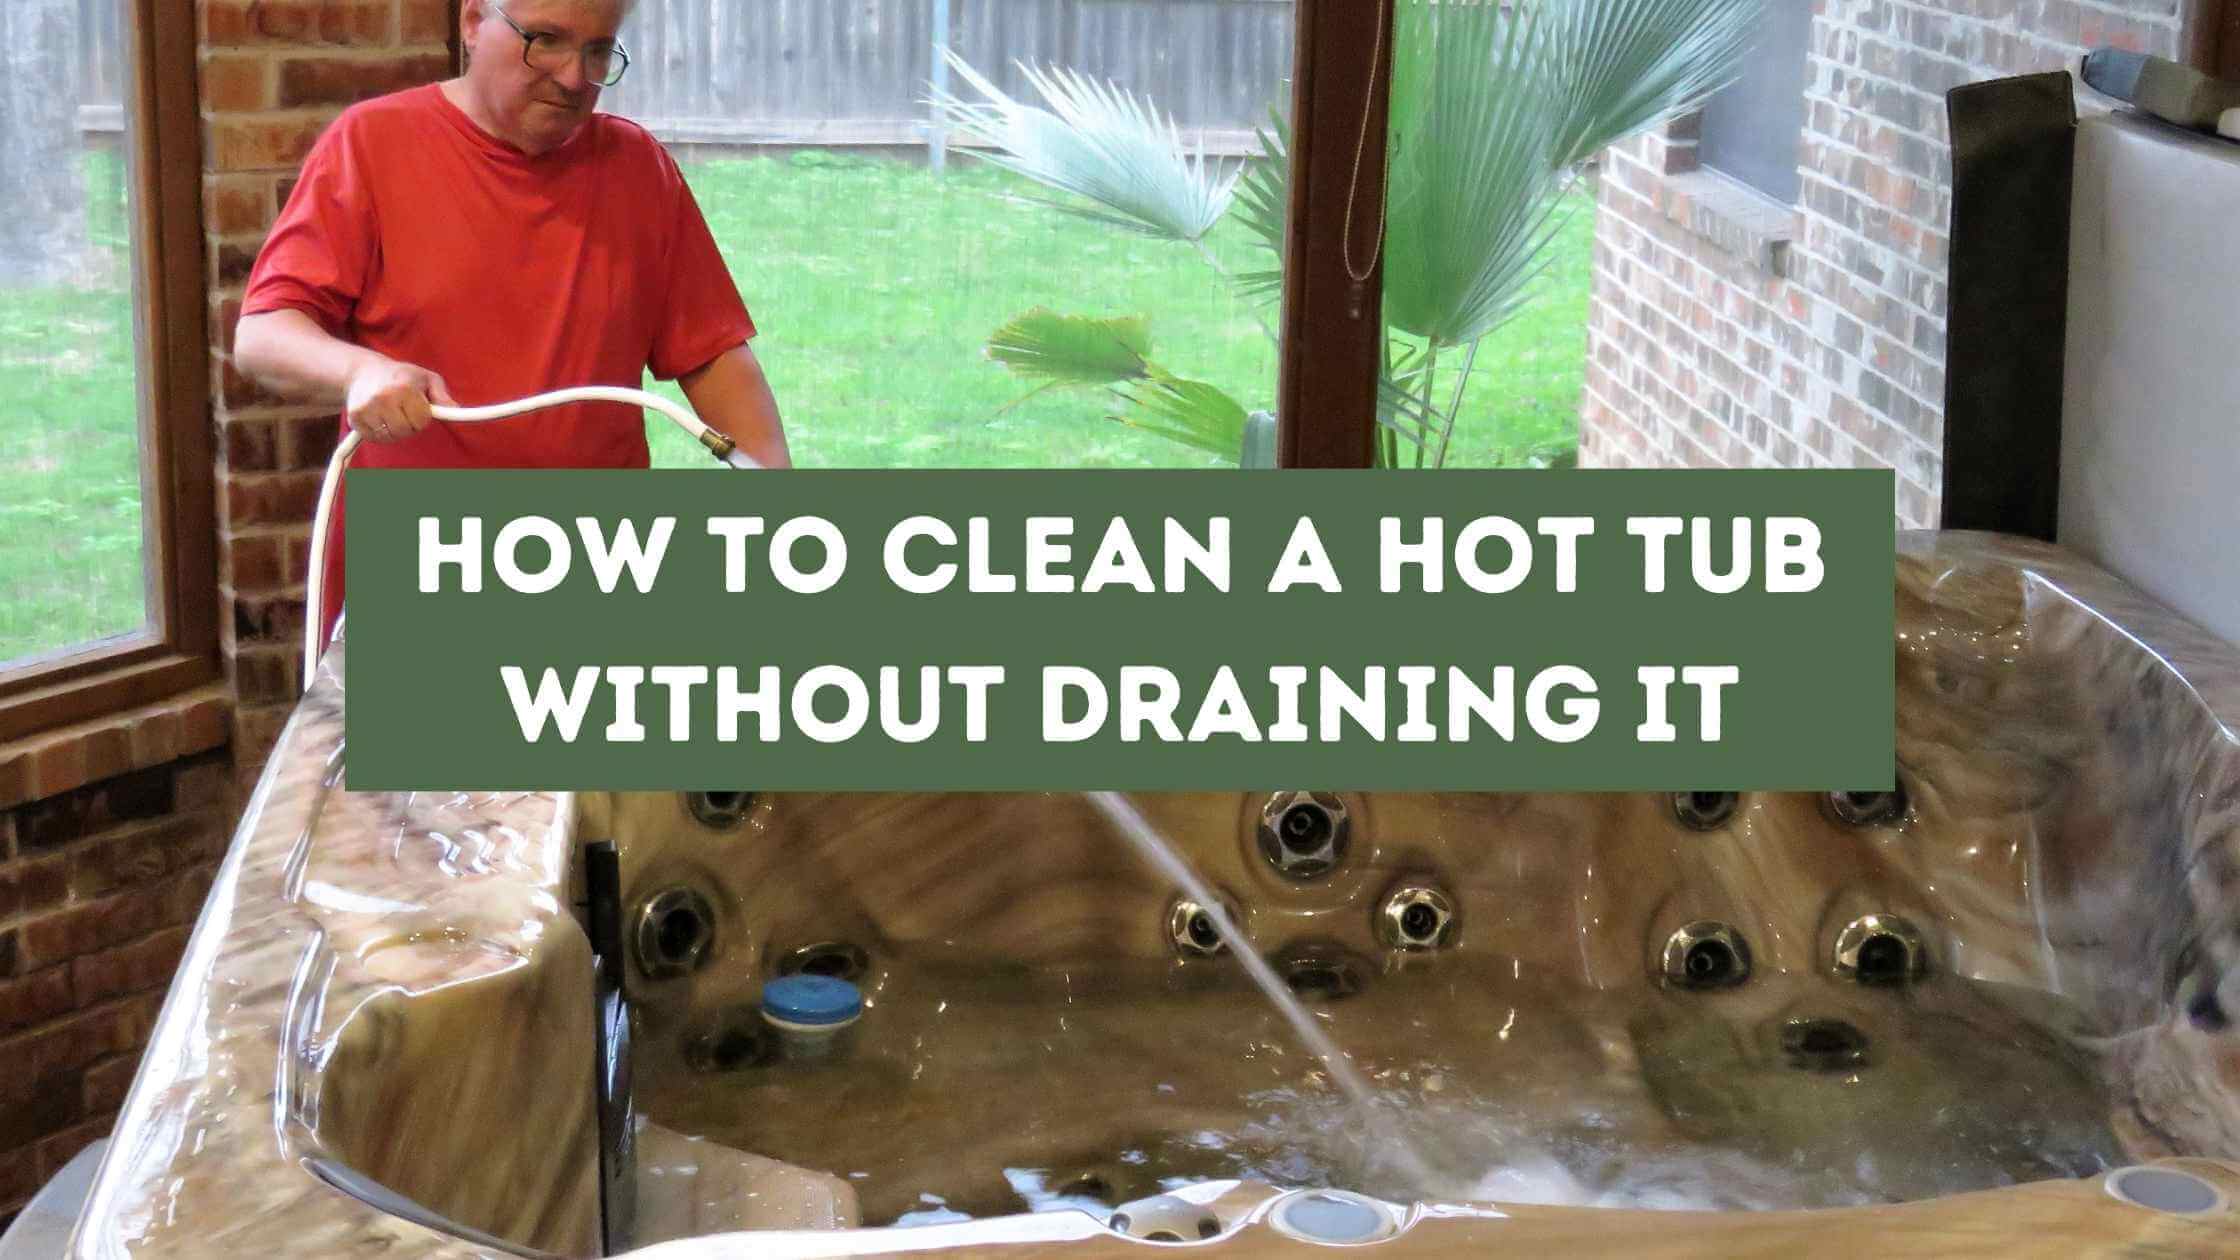 How to Clean a Hot Tub Without Draining It